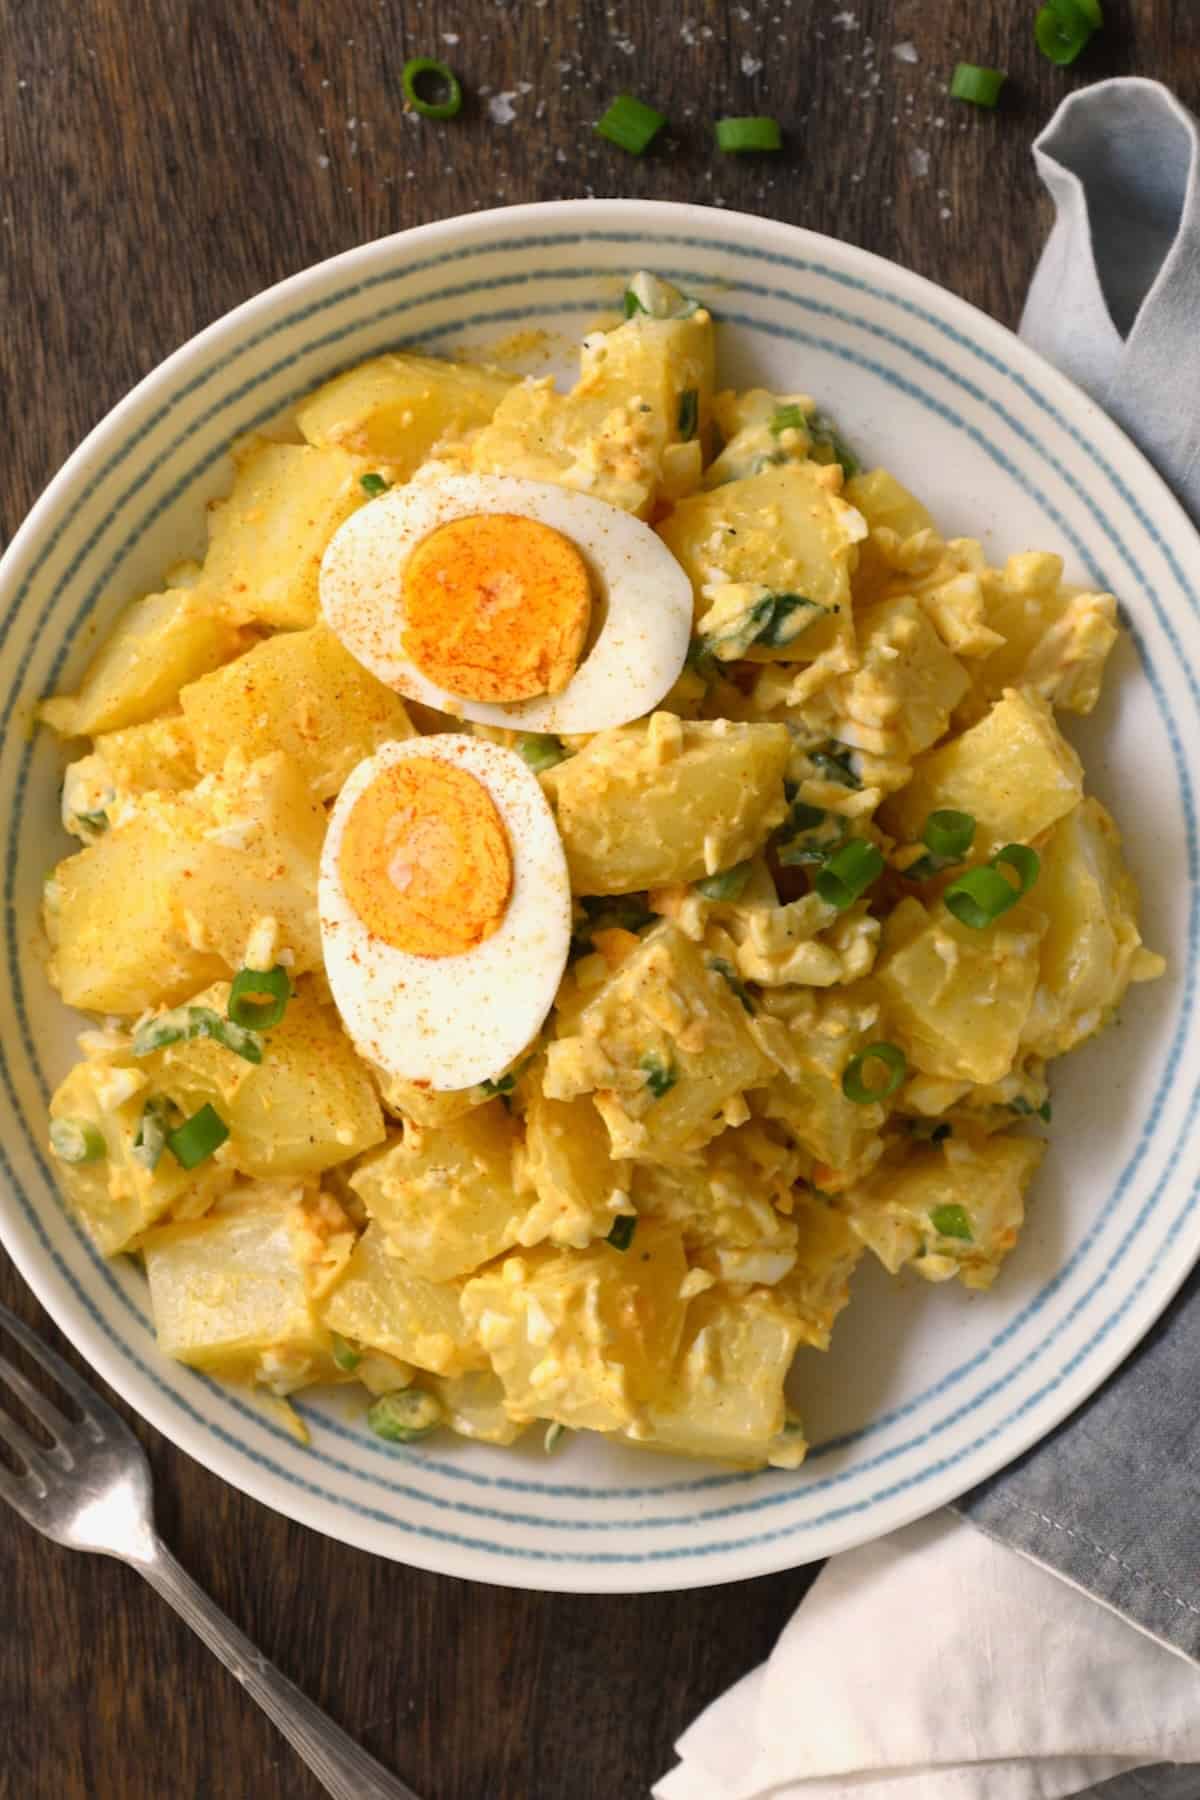 A serving of potato egg salad topped with a boiled halved egg